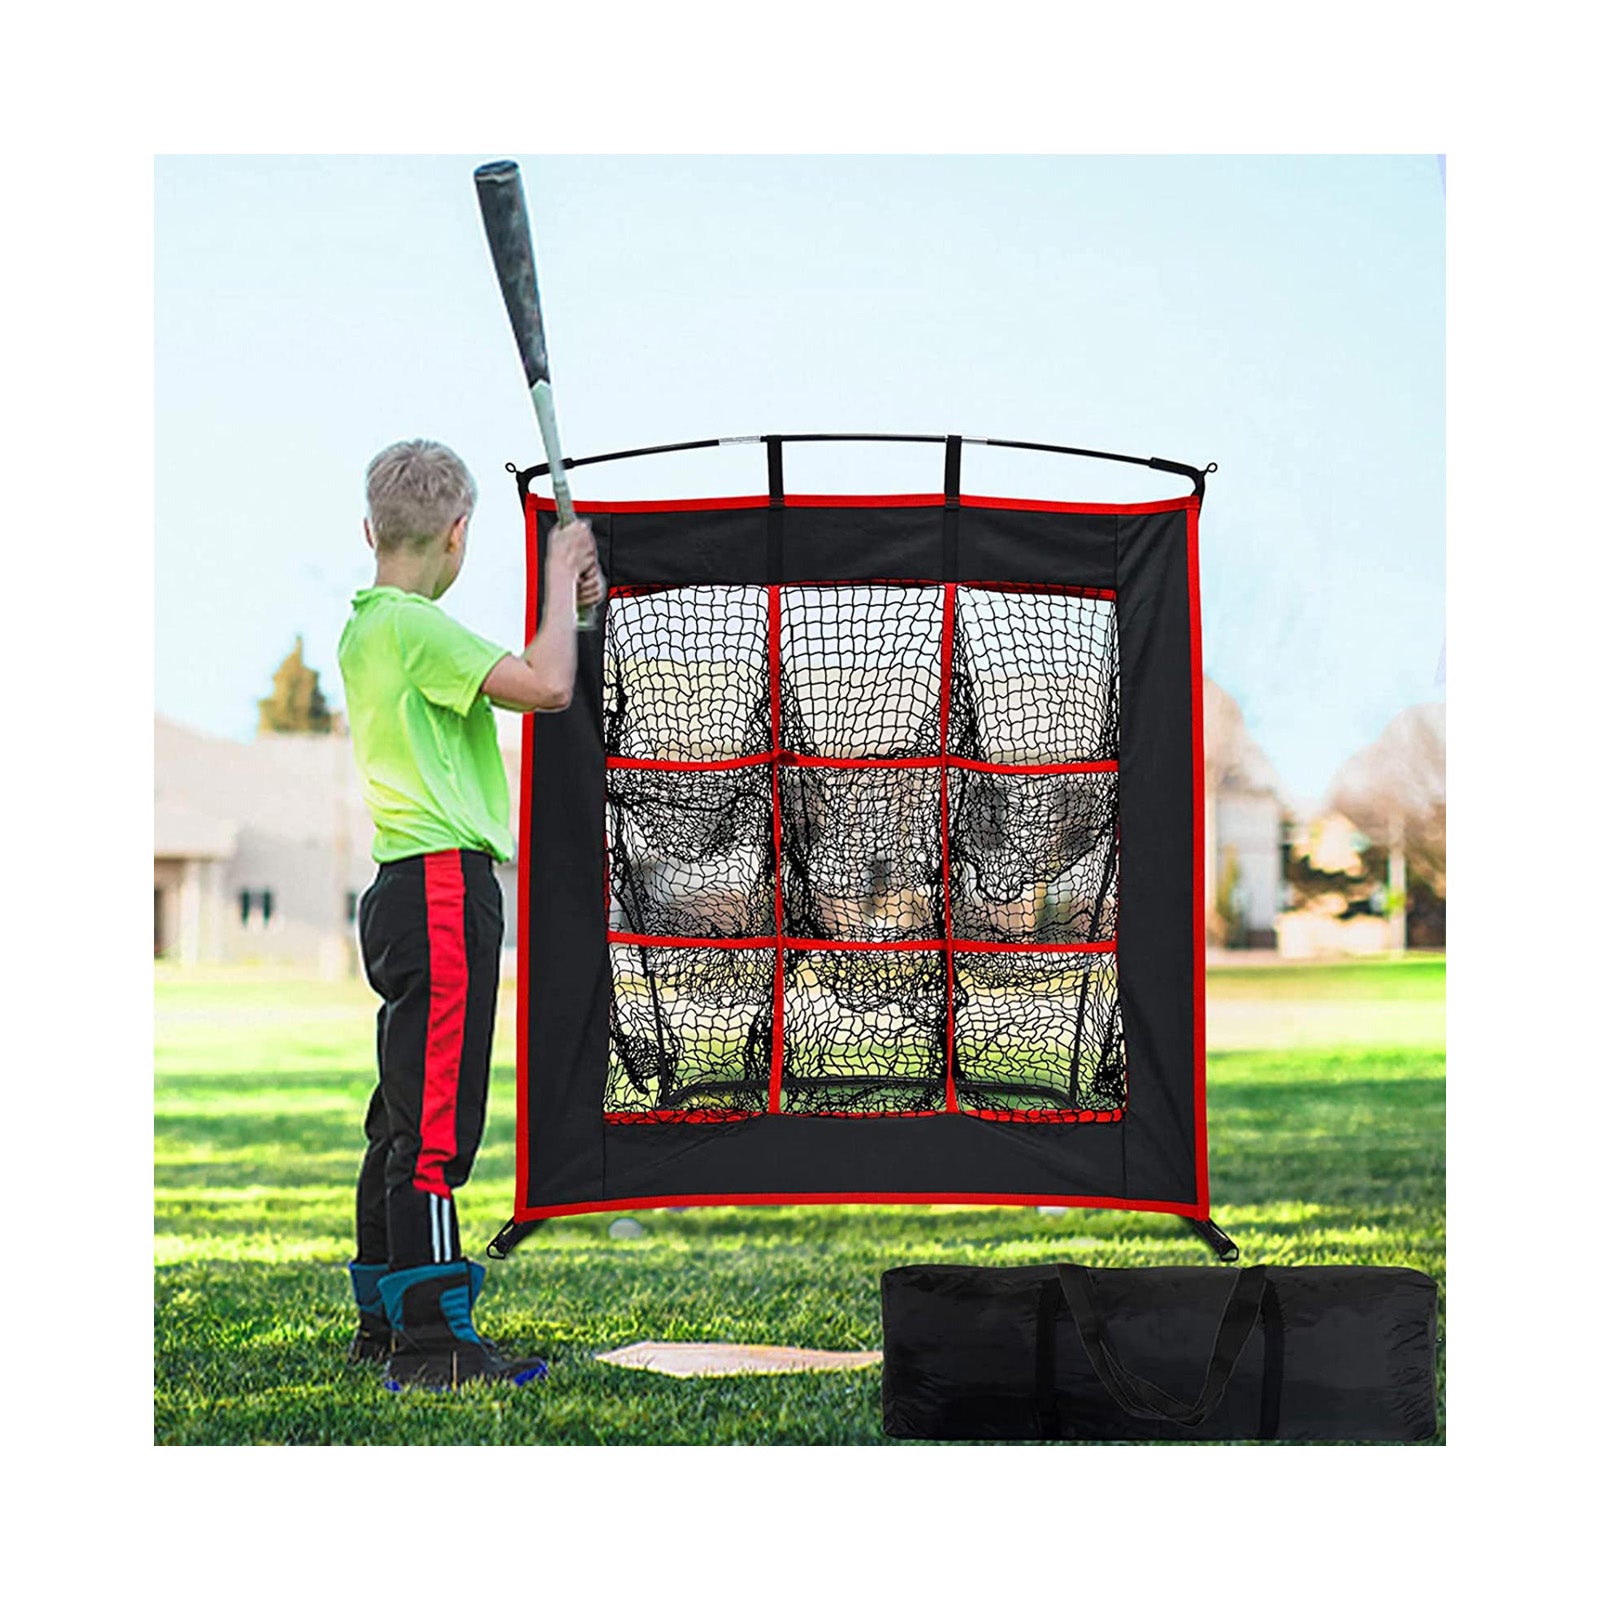 Baseball Softball Pitching Net with Strike Zone, Portable Heavy Duty Steel Frame, 9 Hole Target for Hitting and Pitching